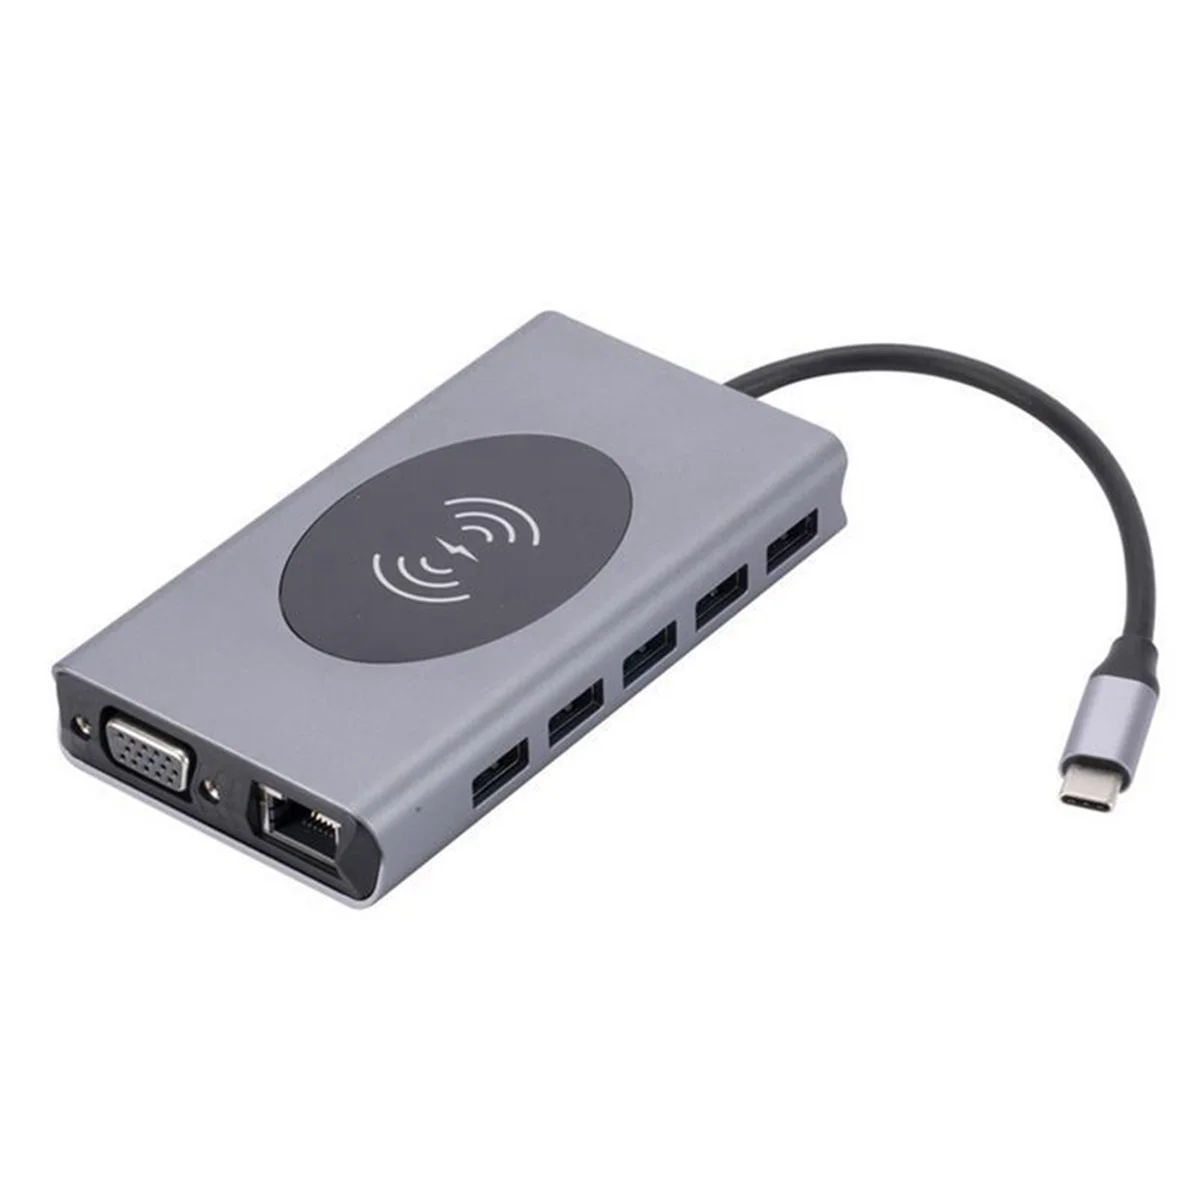 

13-in-1 Type C Docking Station Adapter 15W Wireless Charger USB3.0Hub Hub PD100W Expander RJ45 Gigabit Network Card